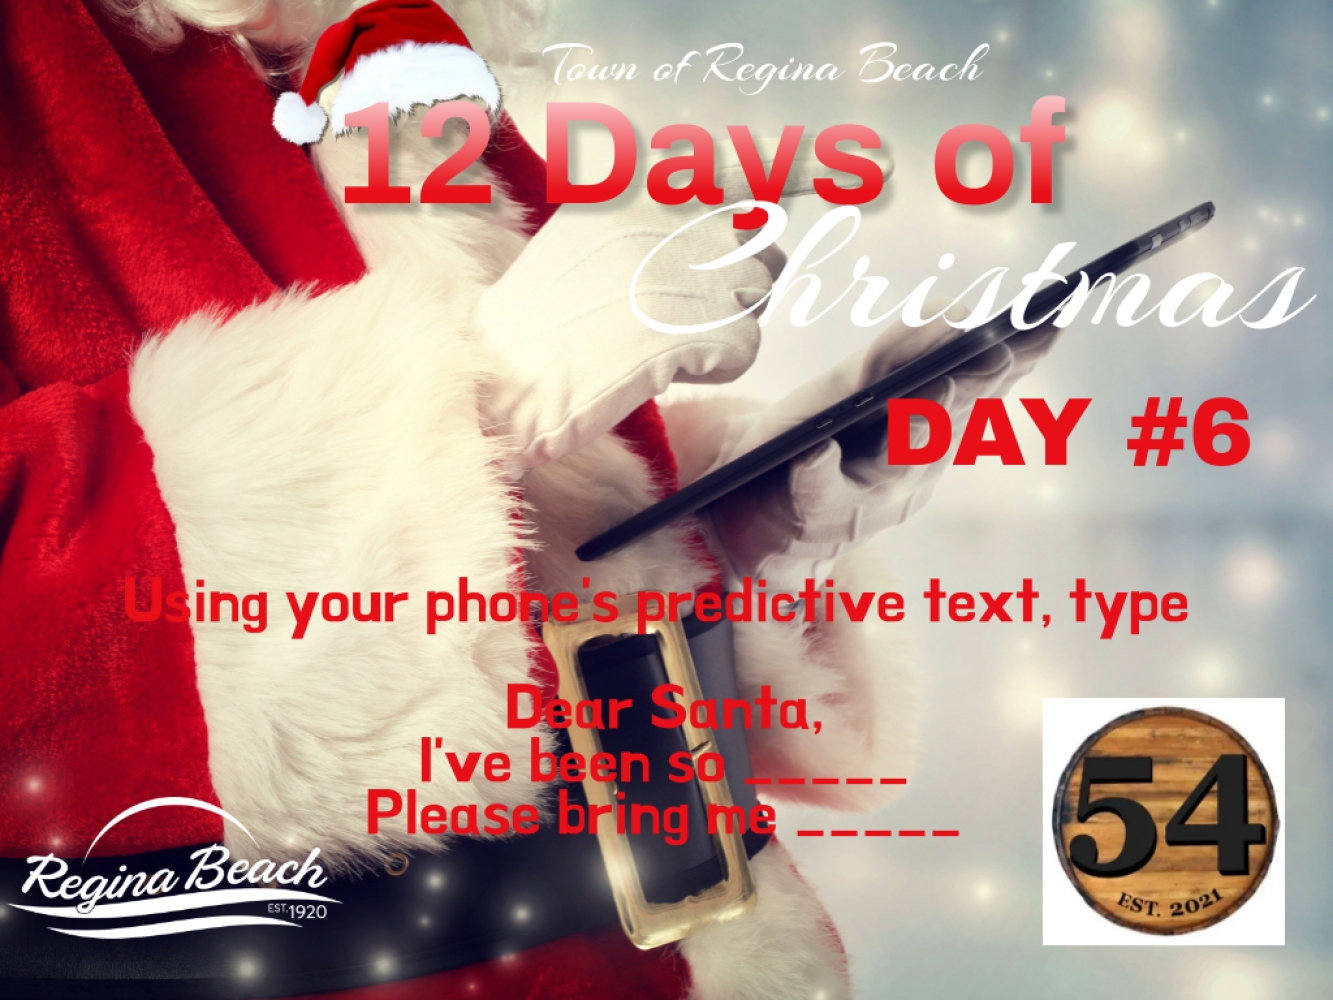 Day #6 of Our 12 Days of Christmas